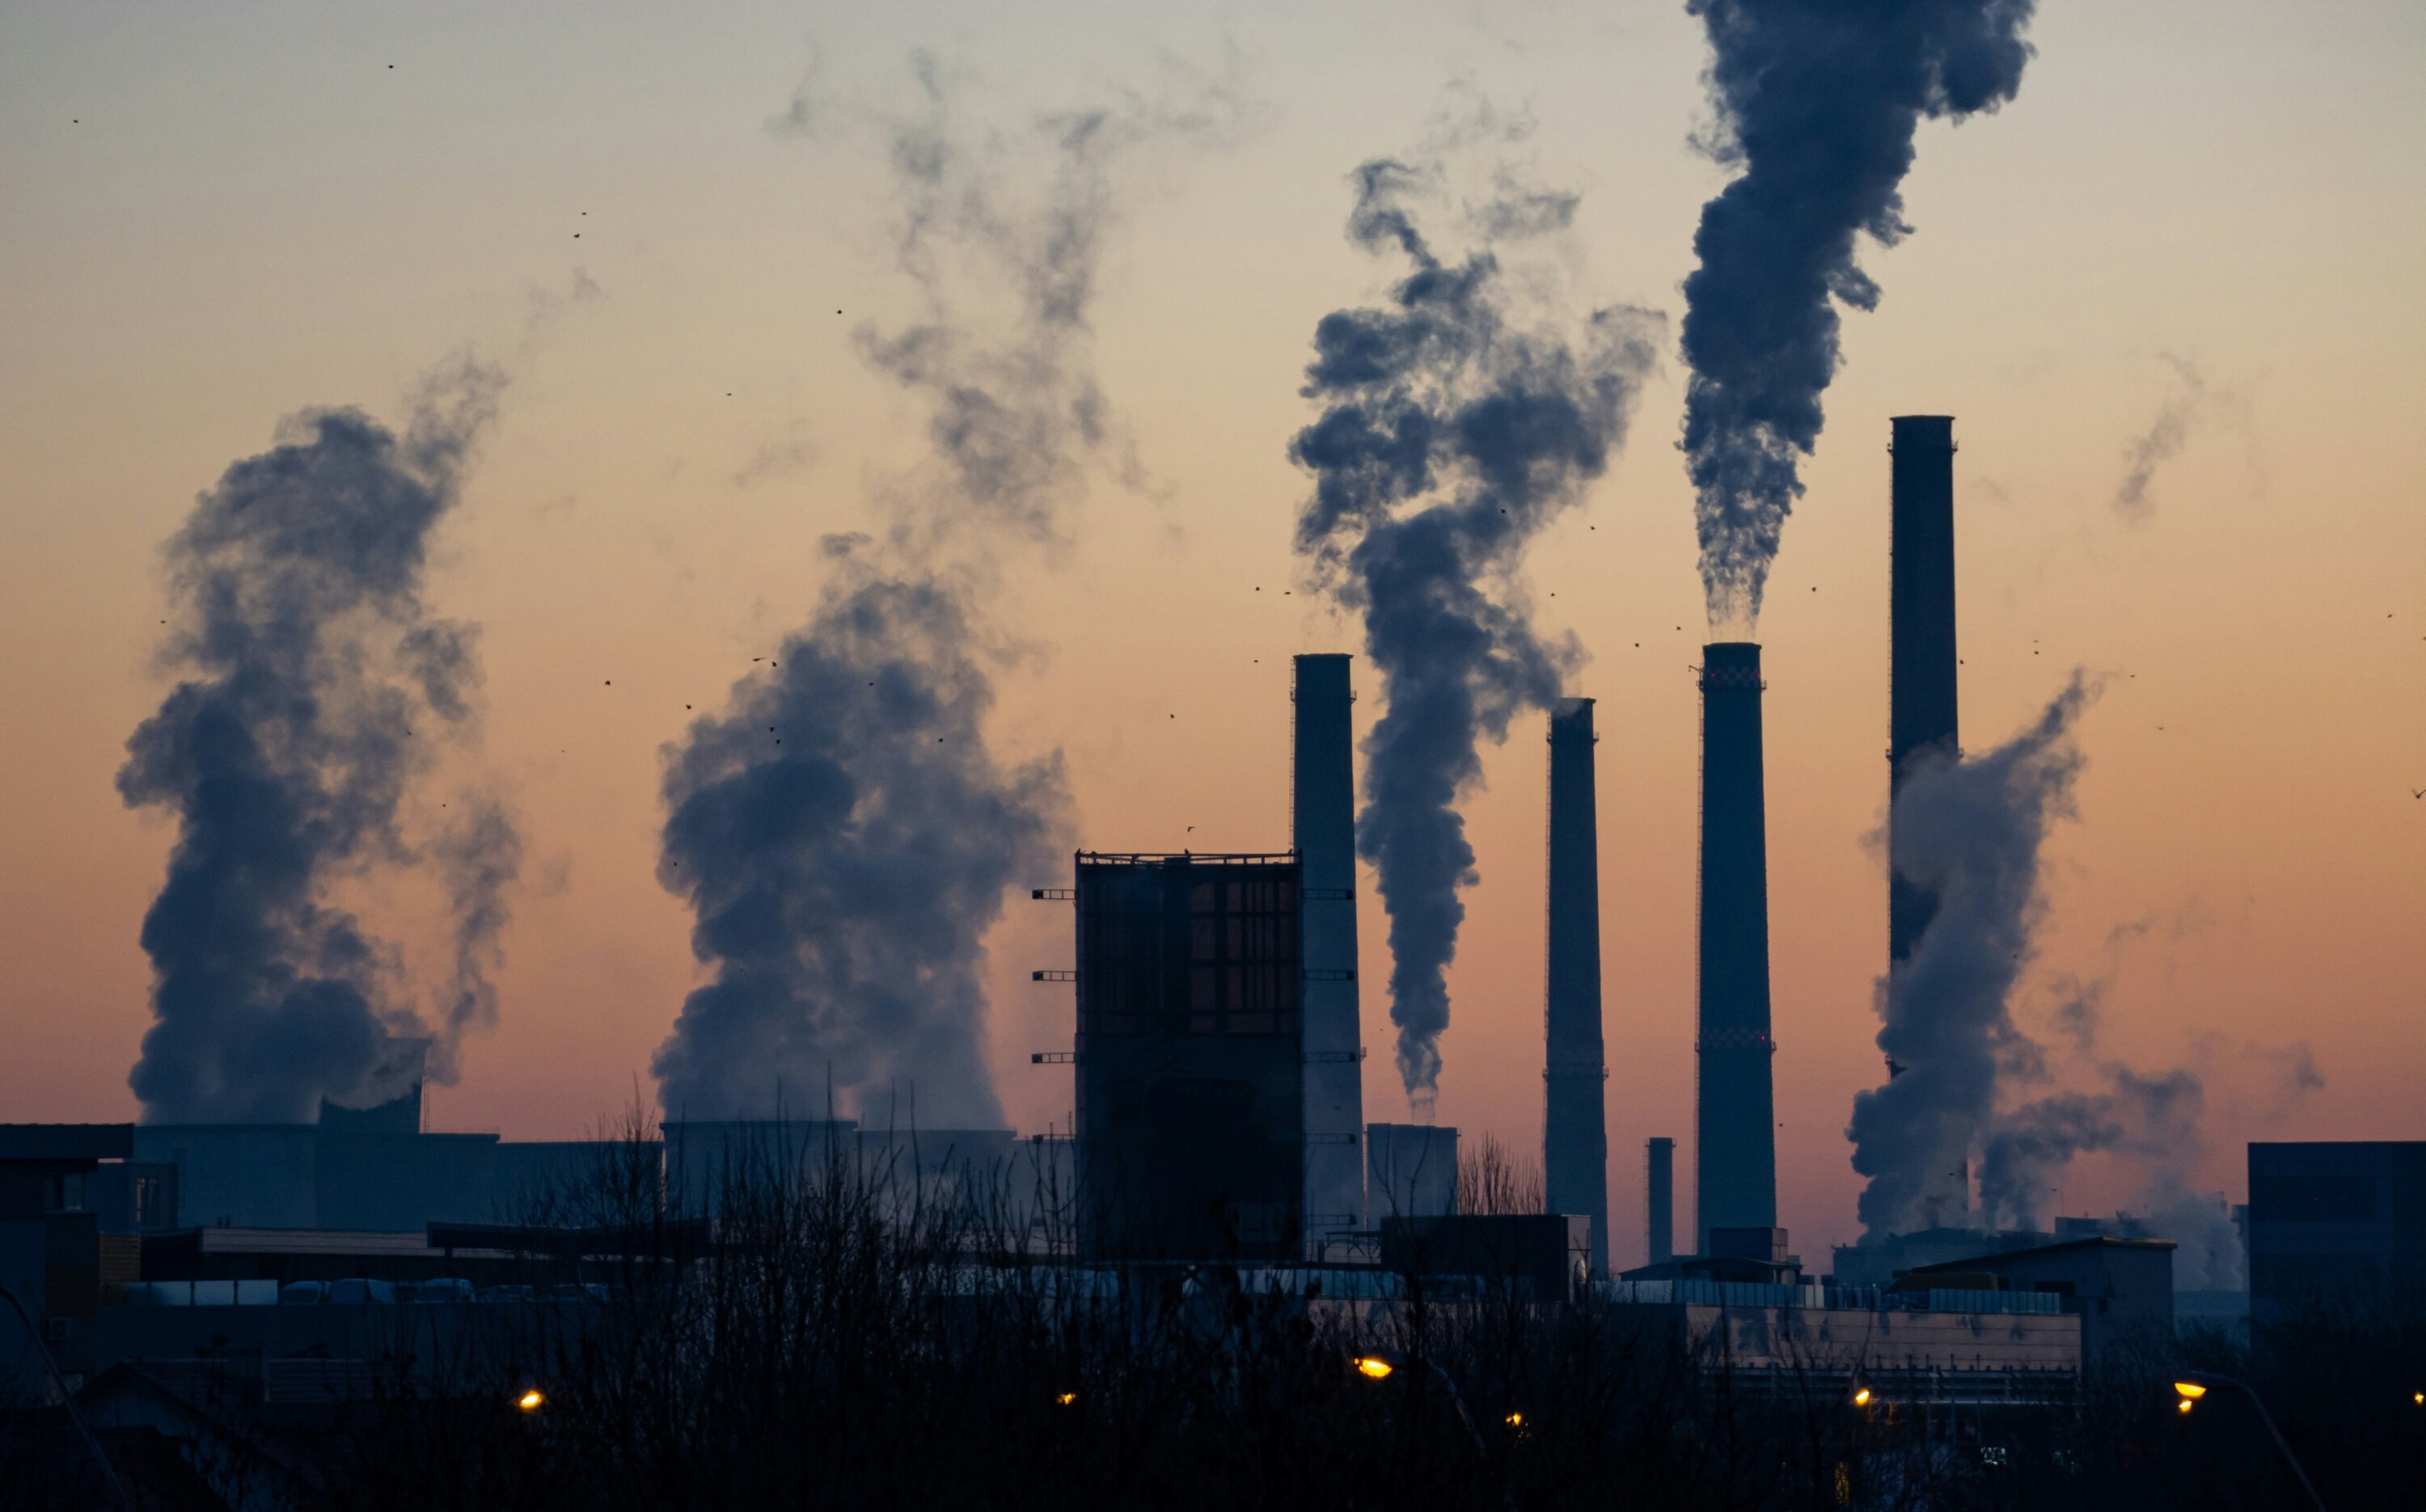 An image of a coal power plant with smoke coming out of the towers during sunset